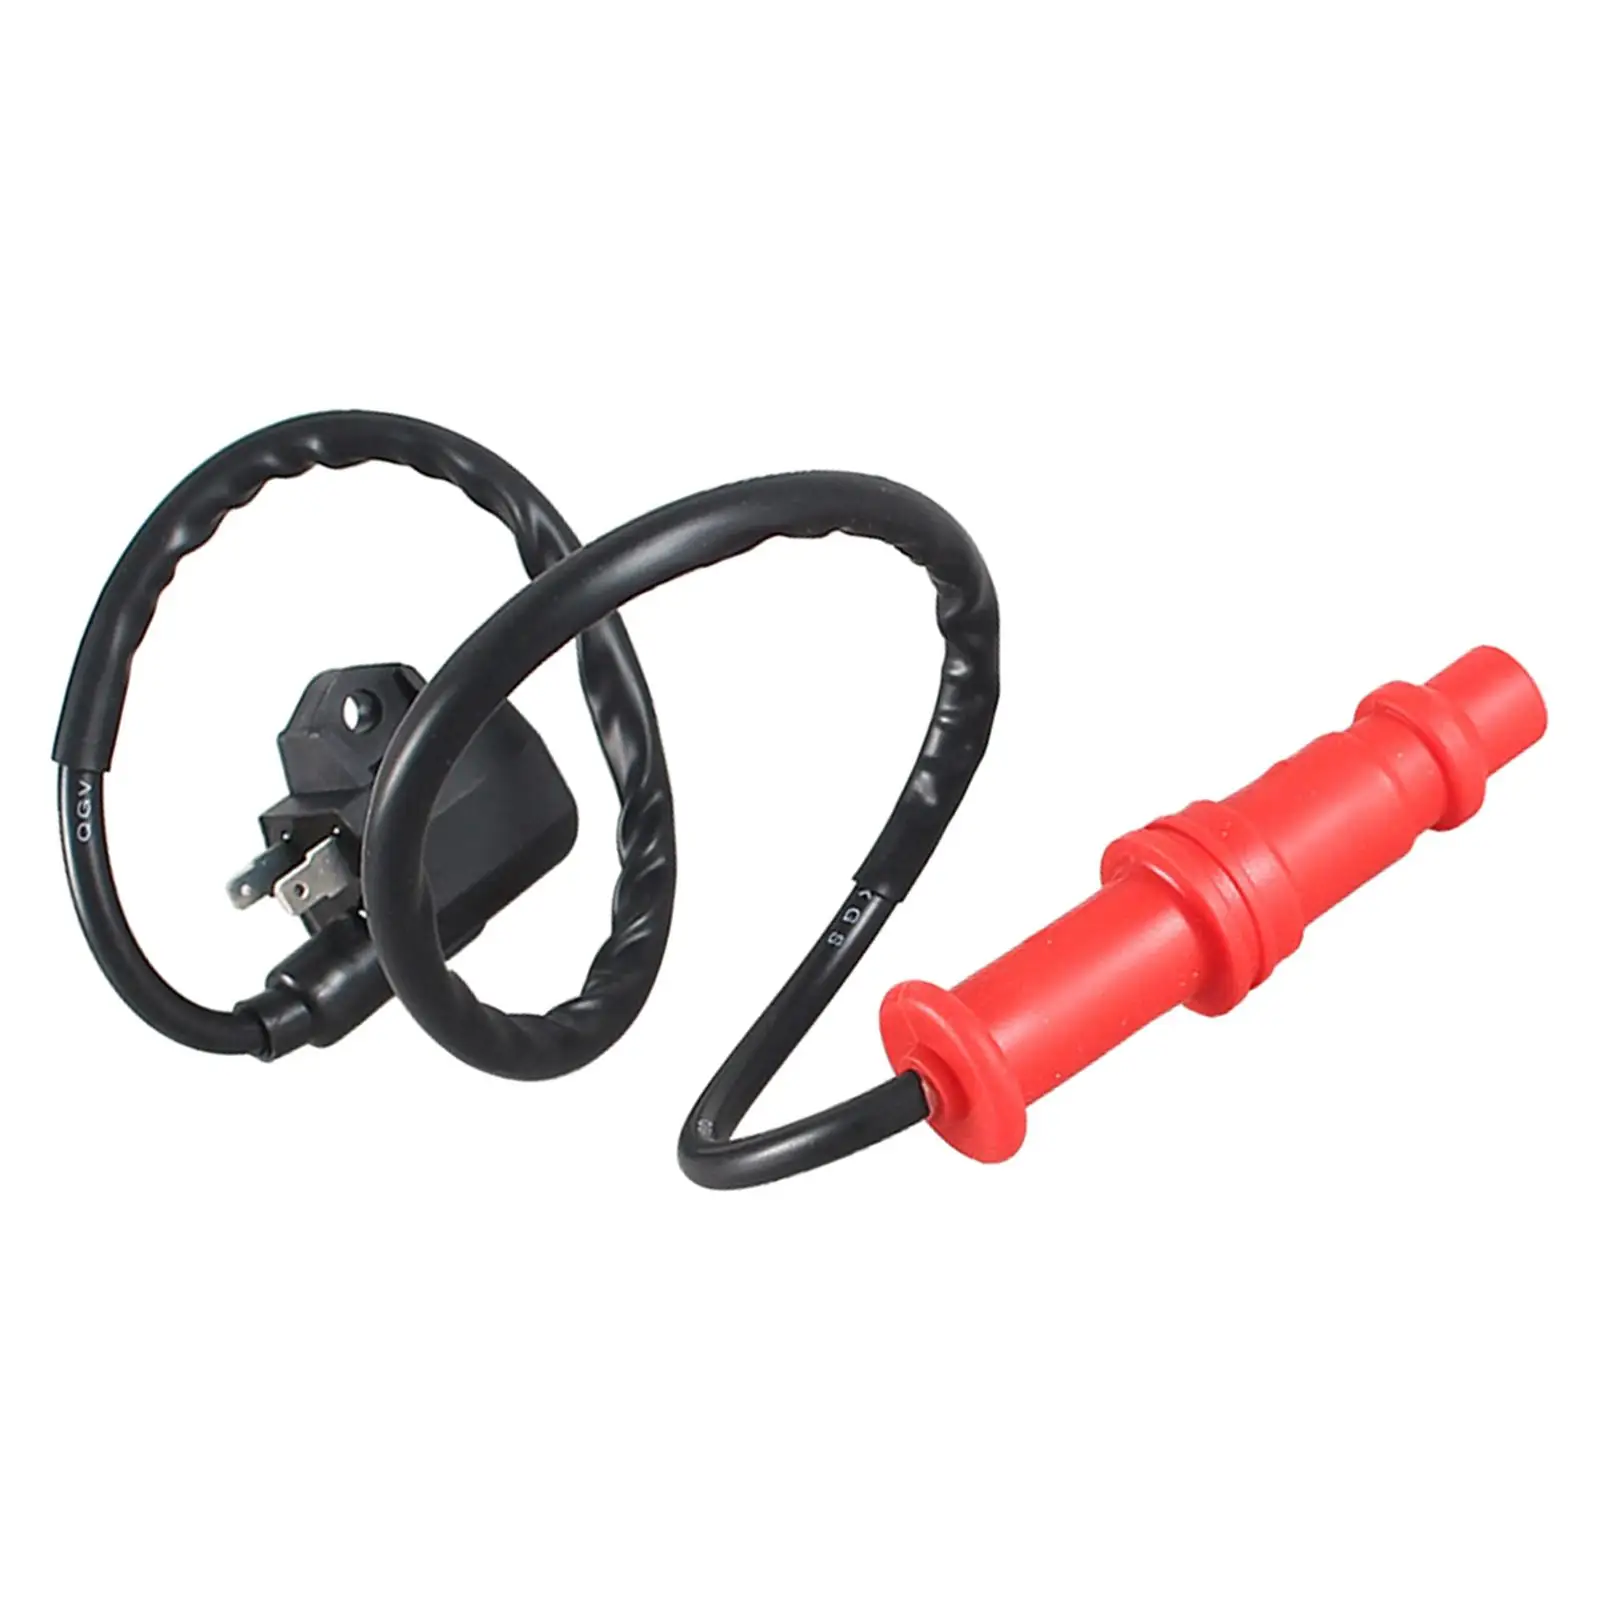 Ignition Coil for Polaris Ranger 400 500 Accessories Spare Parts Replacement